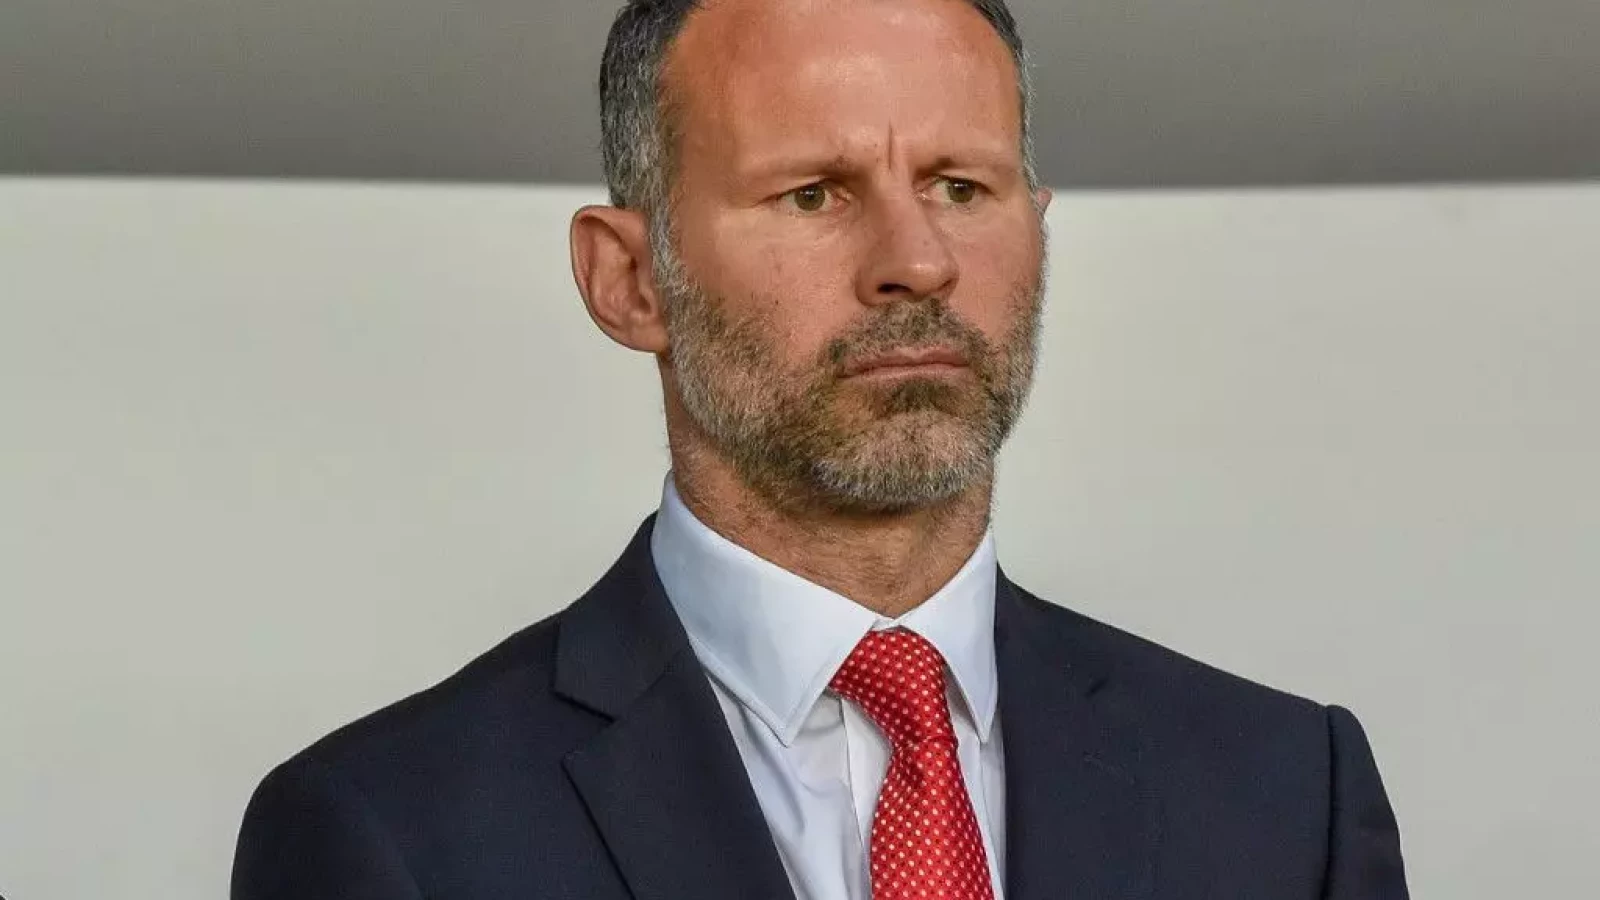 Ryan Giggs prosecution over domestic violence allegations abandoned ...